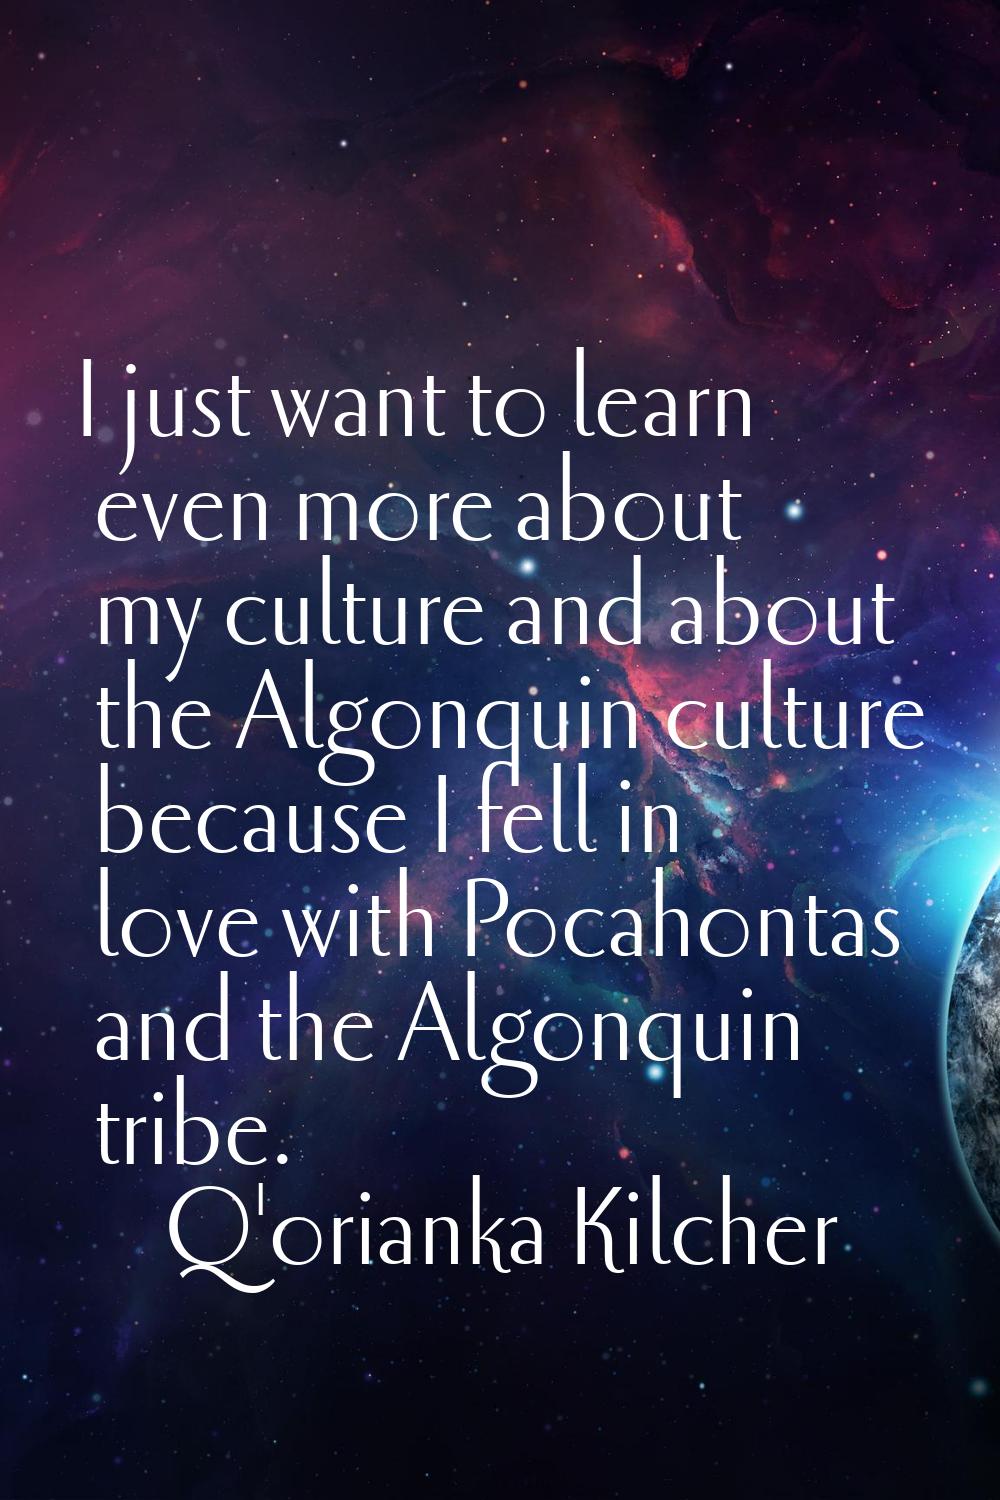 I just want to learn even more about my culture and about the Algonquin culture because I fell in l